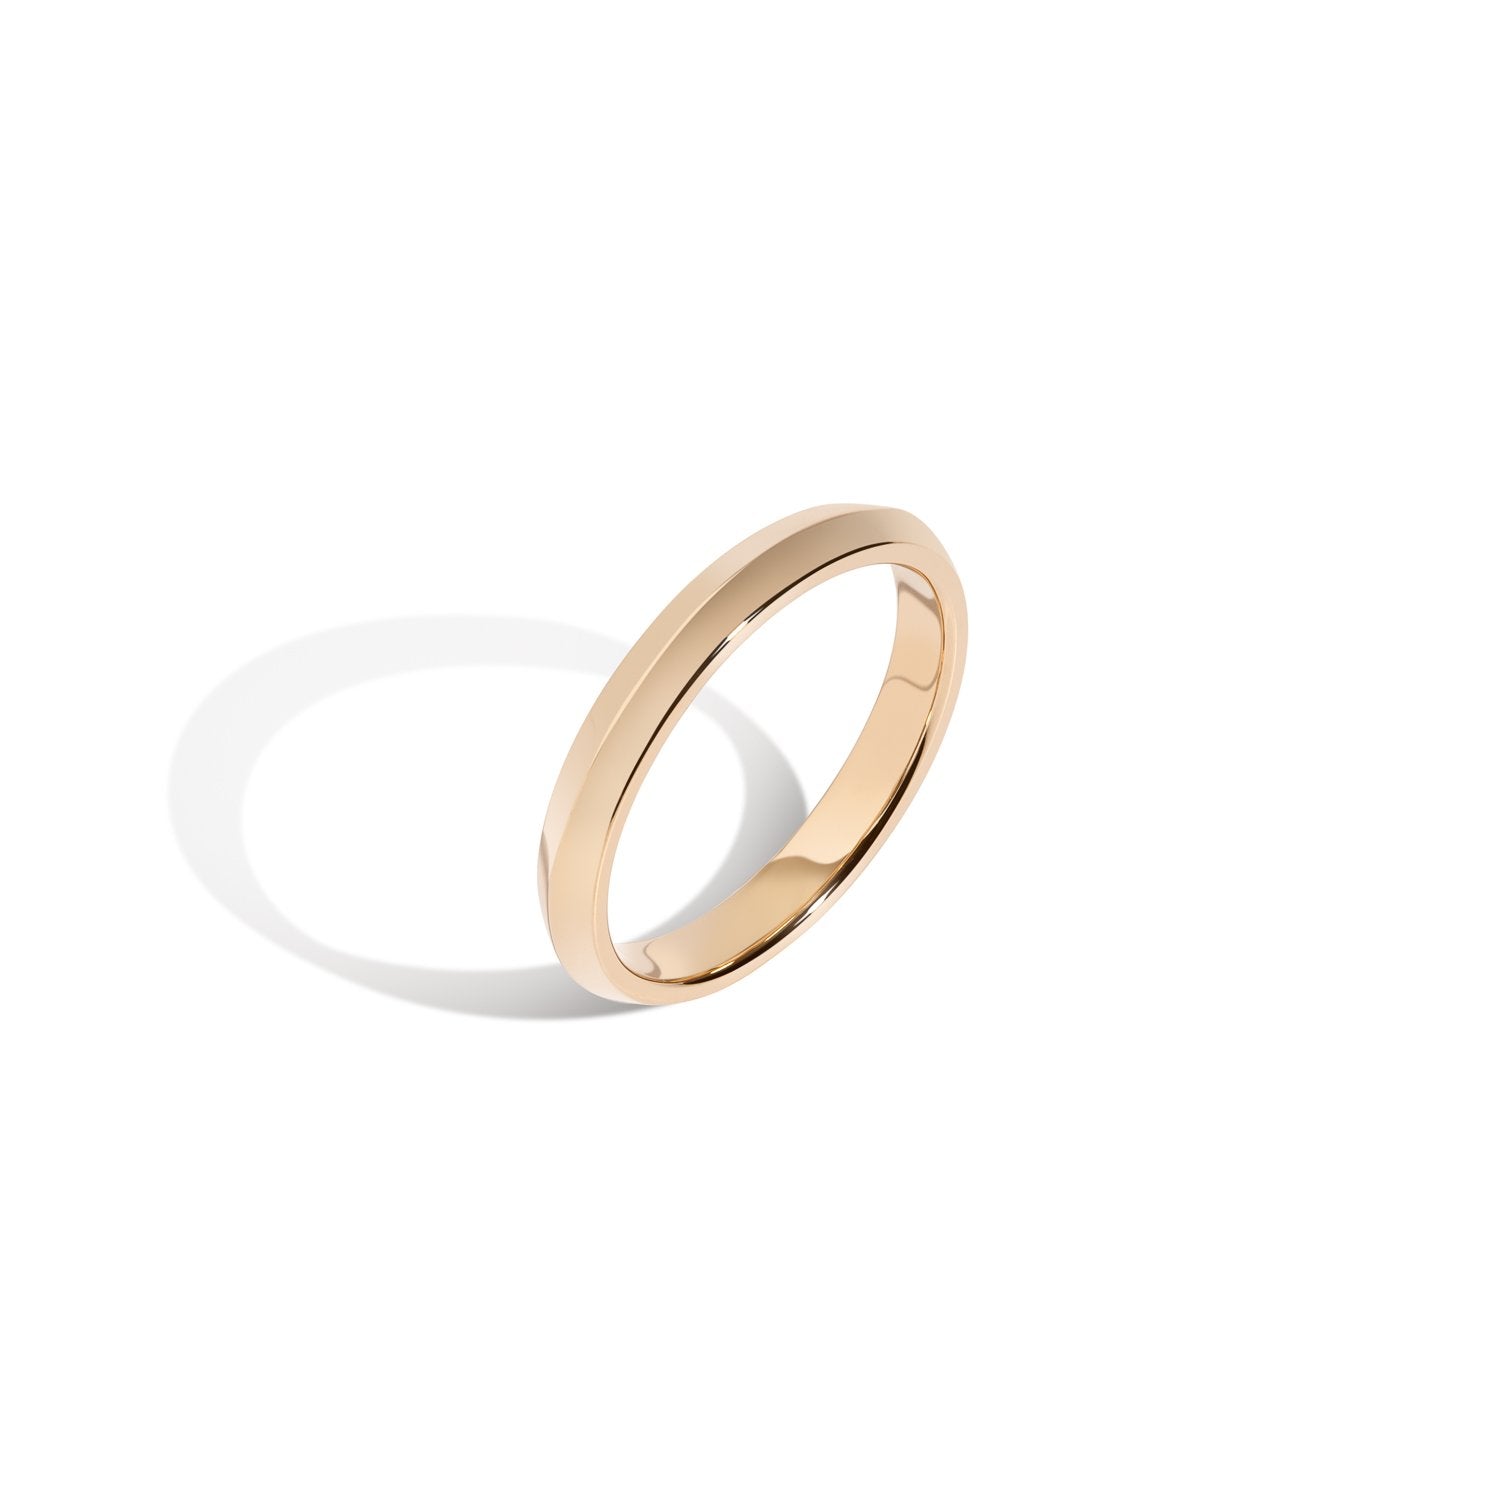 IN STOCK Every Love Knife Edge Yellow Gold Band - Size 8